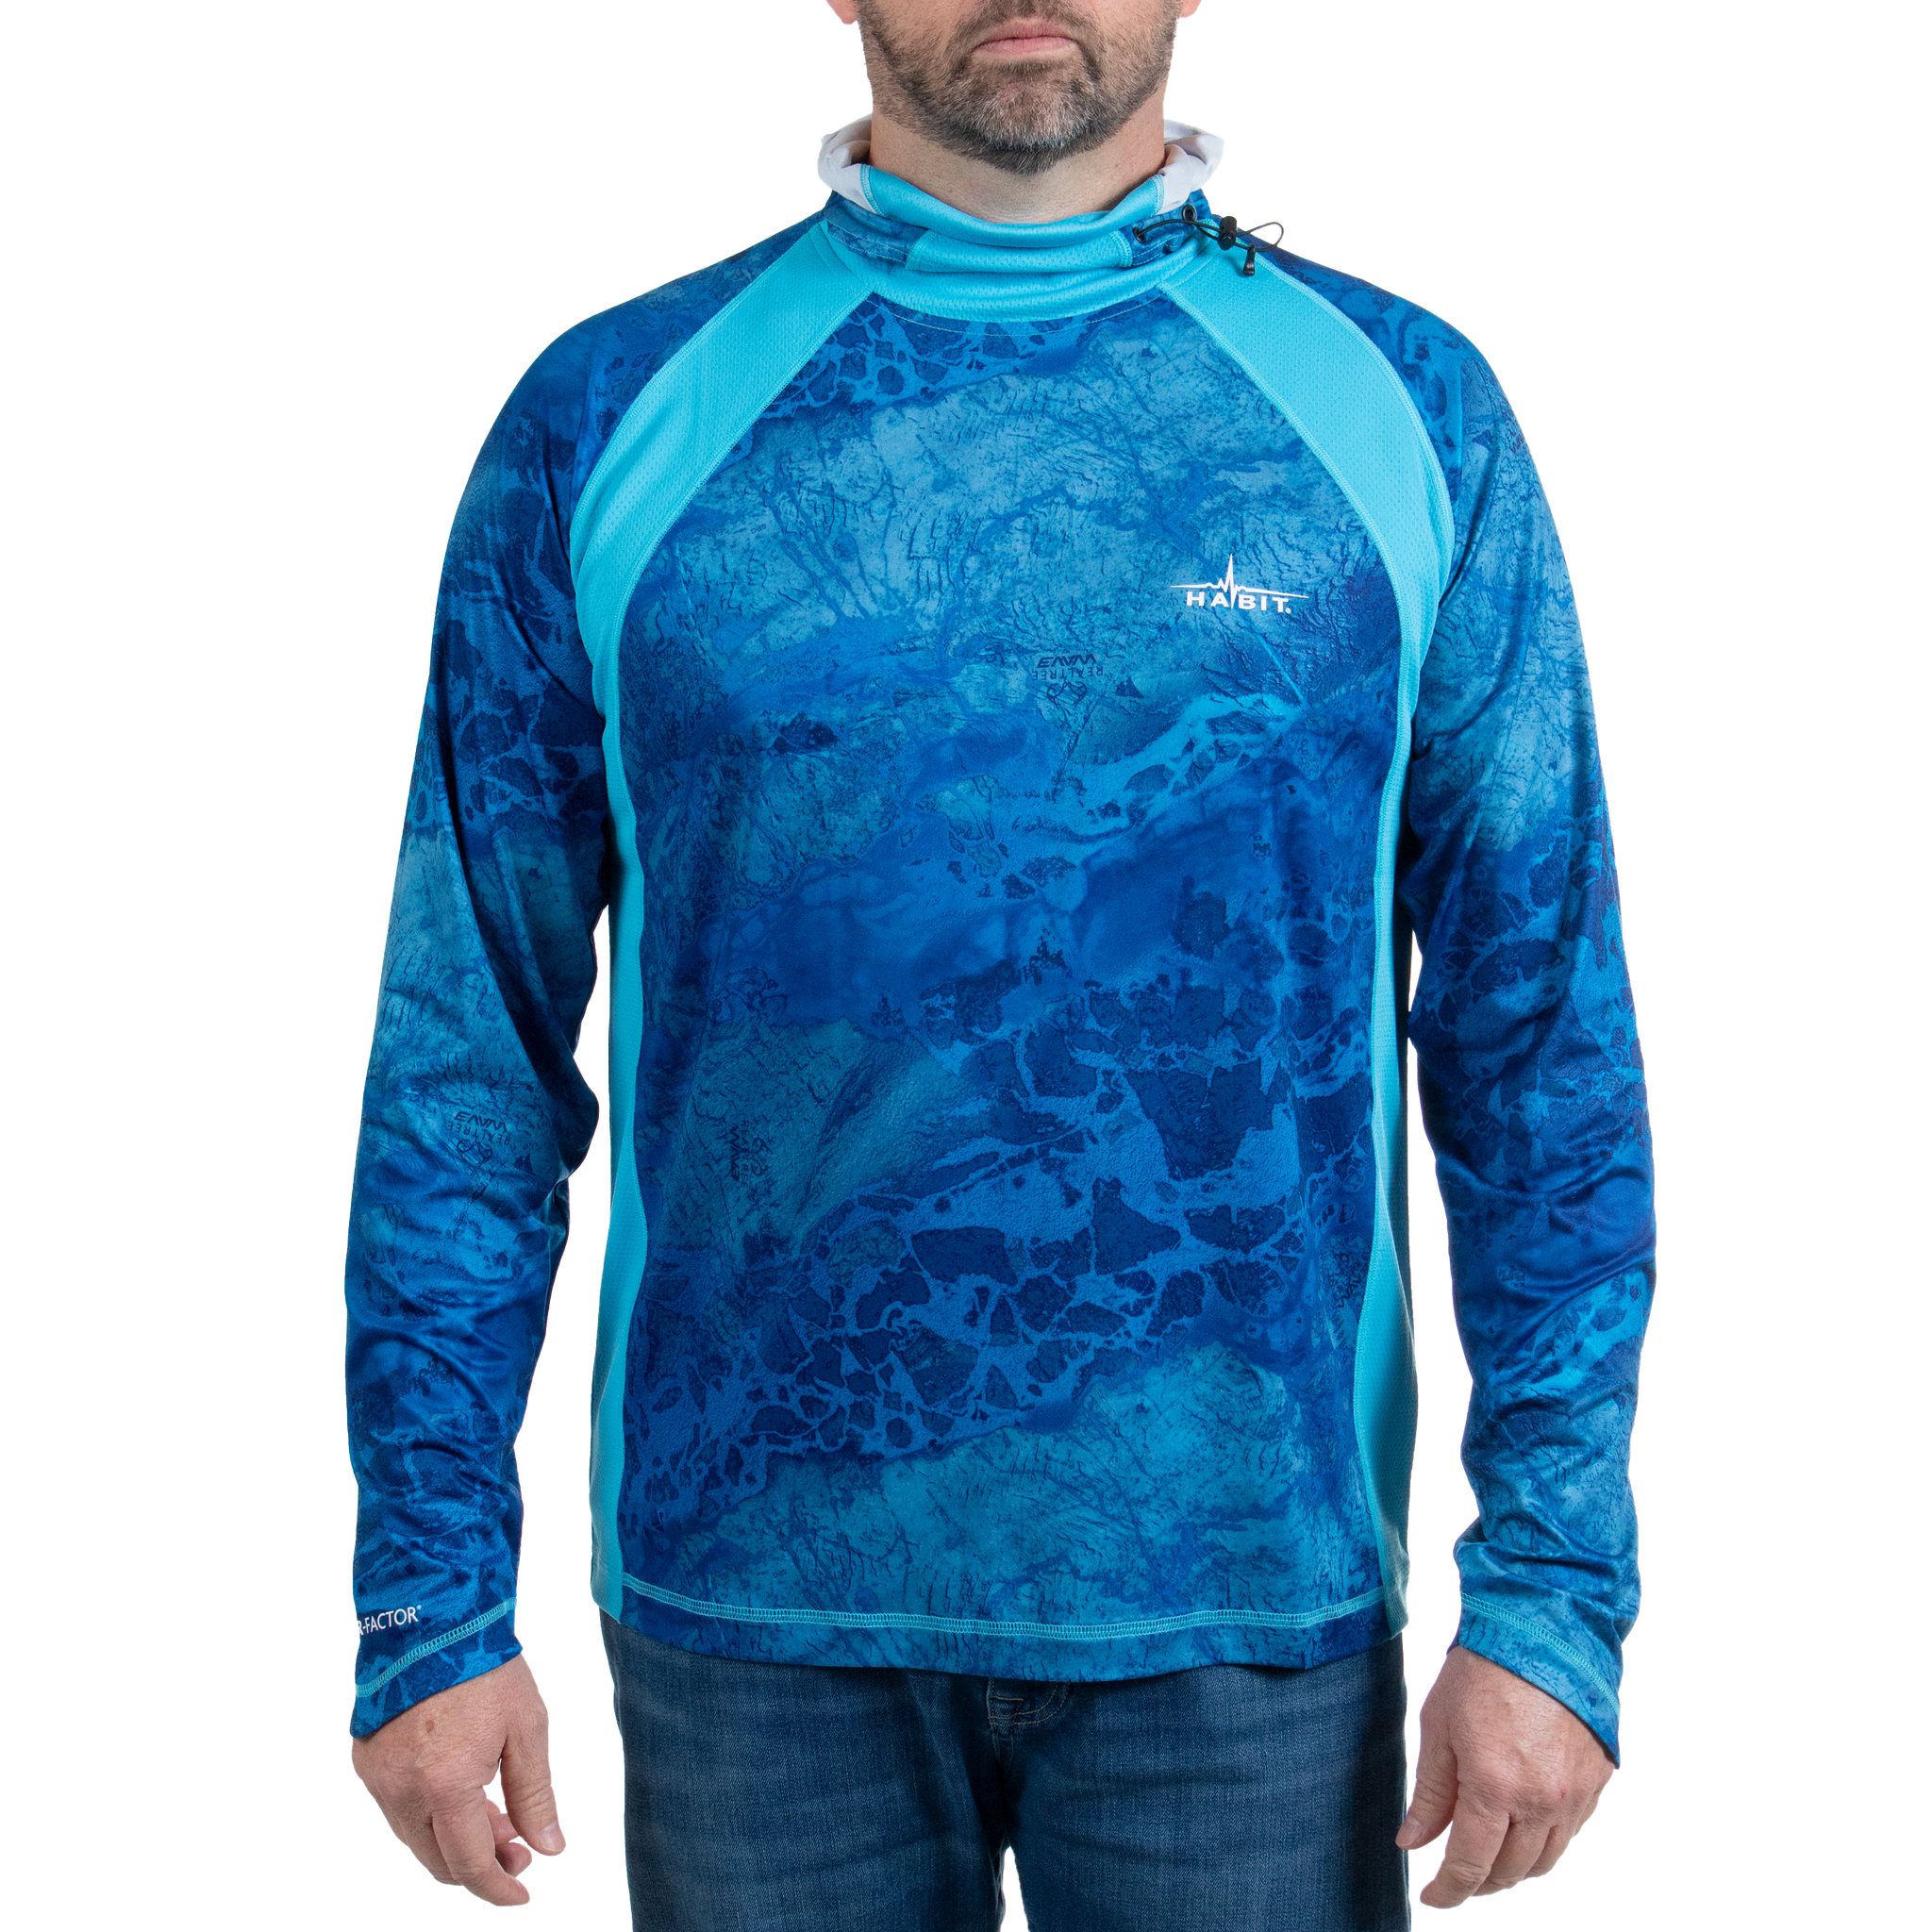 Men’s Coppermine Cove Hooded Performance Layer with Gaiter blue Aquarius front